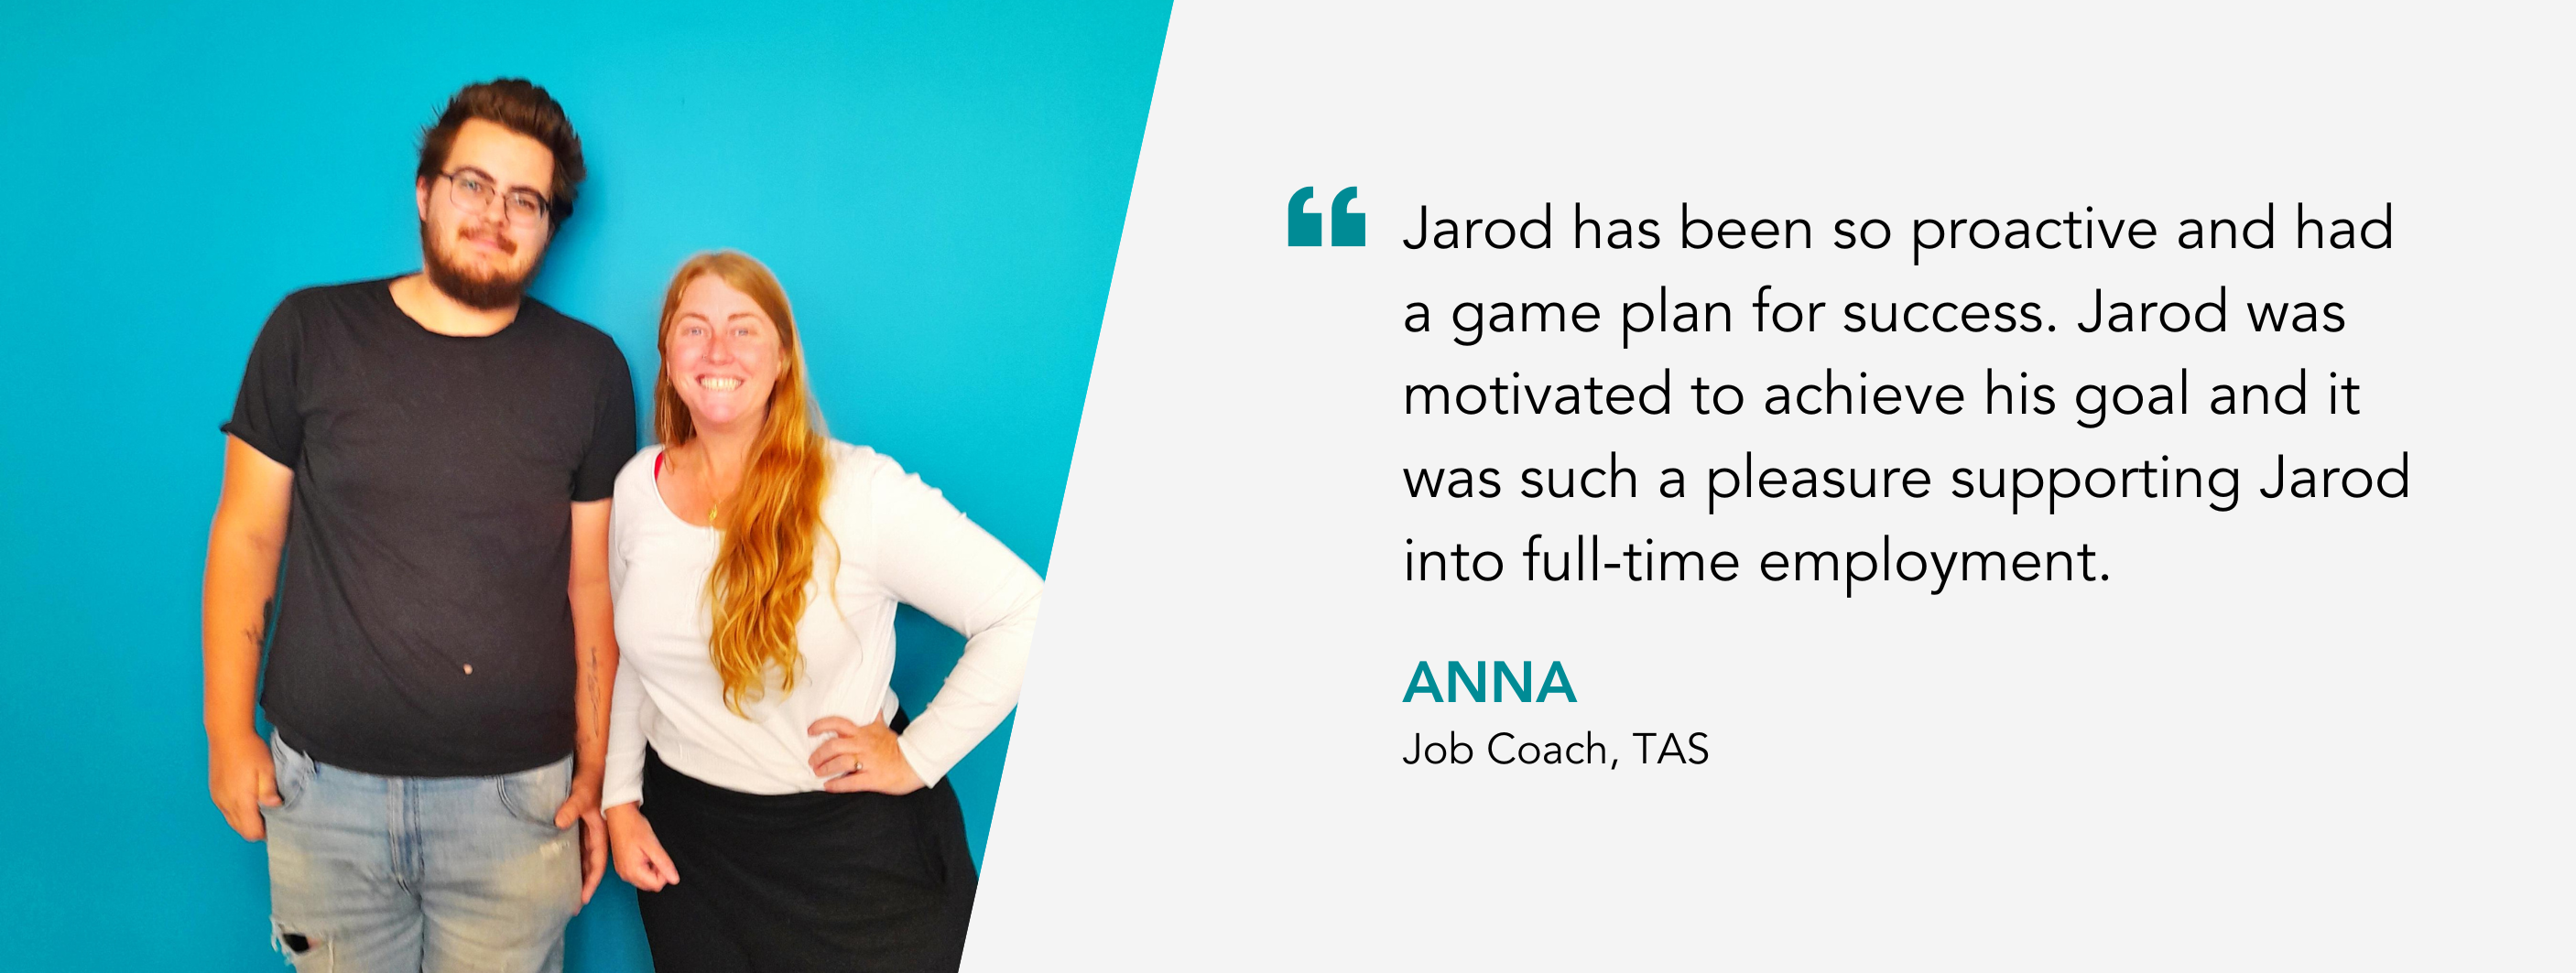 Jarod has been so proactive and had a game plan for success. Jarod was motivated to achieve his goal and it was such a pleasure supporting Jarod into full-time employment. Anna, Job Coach, TAS